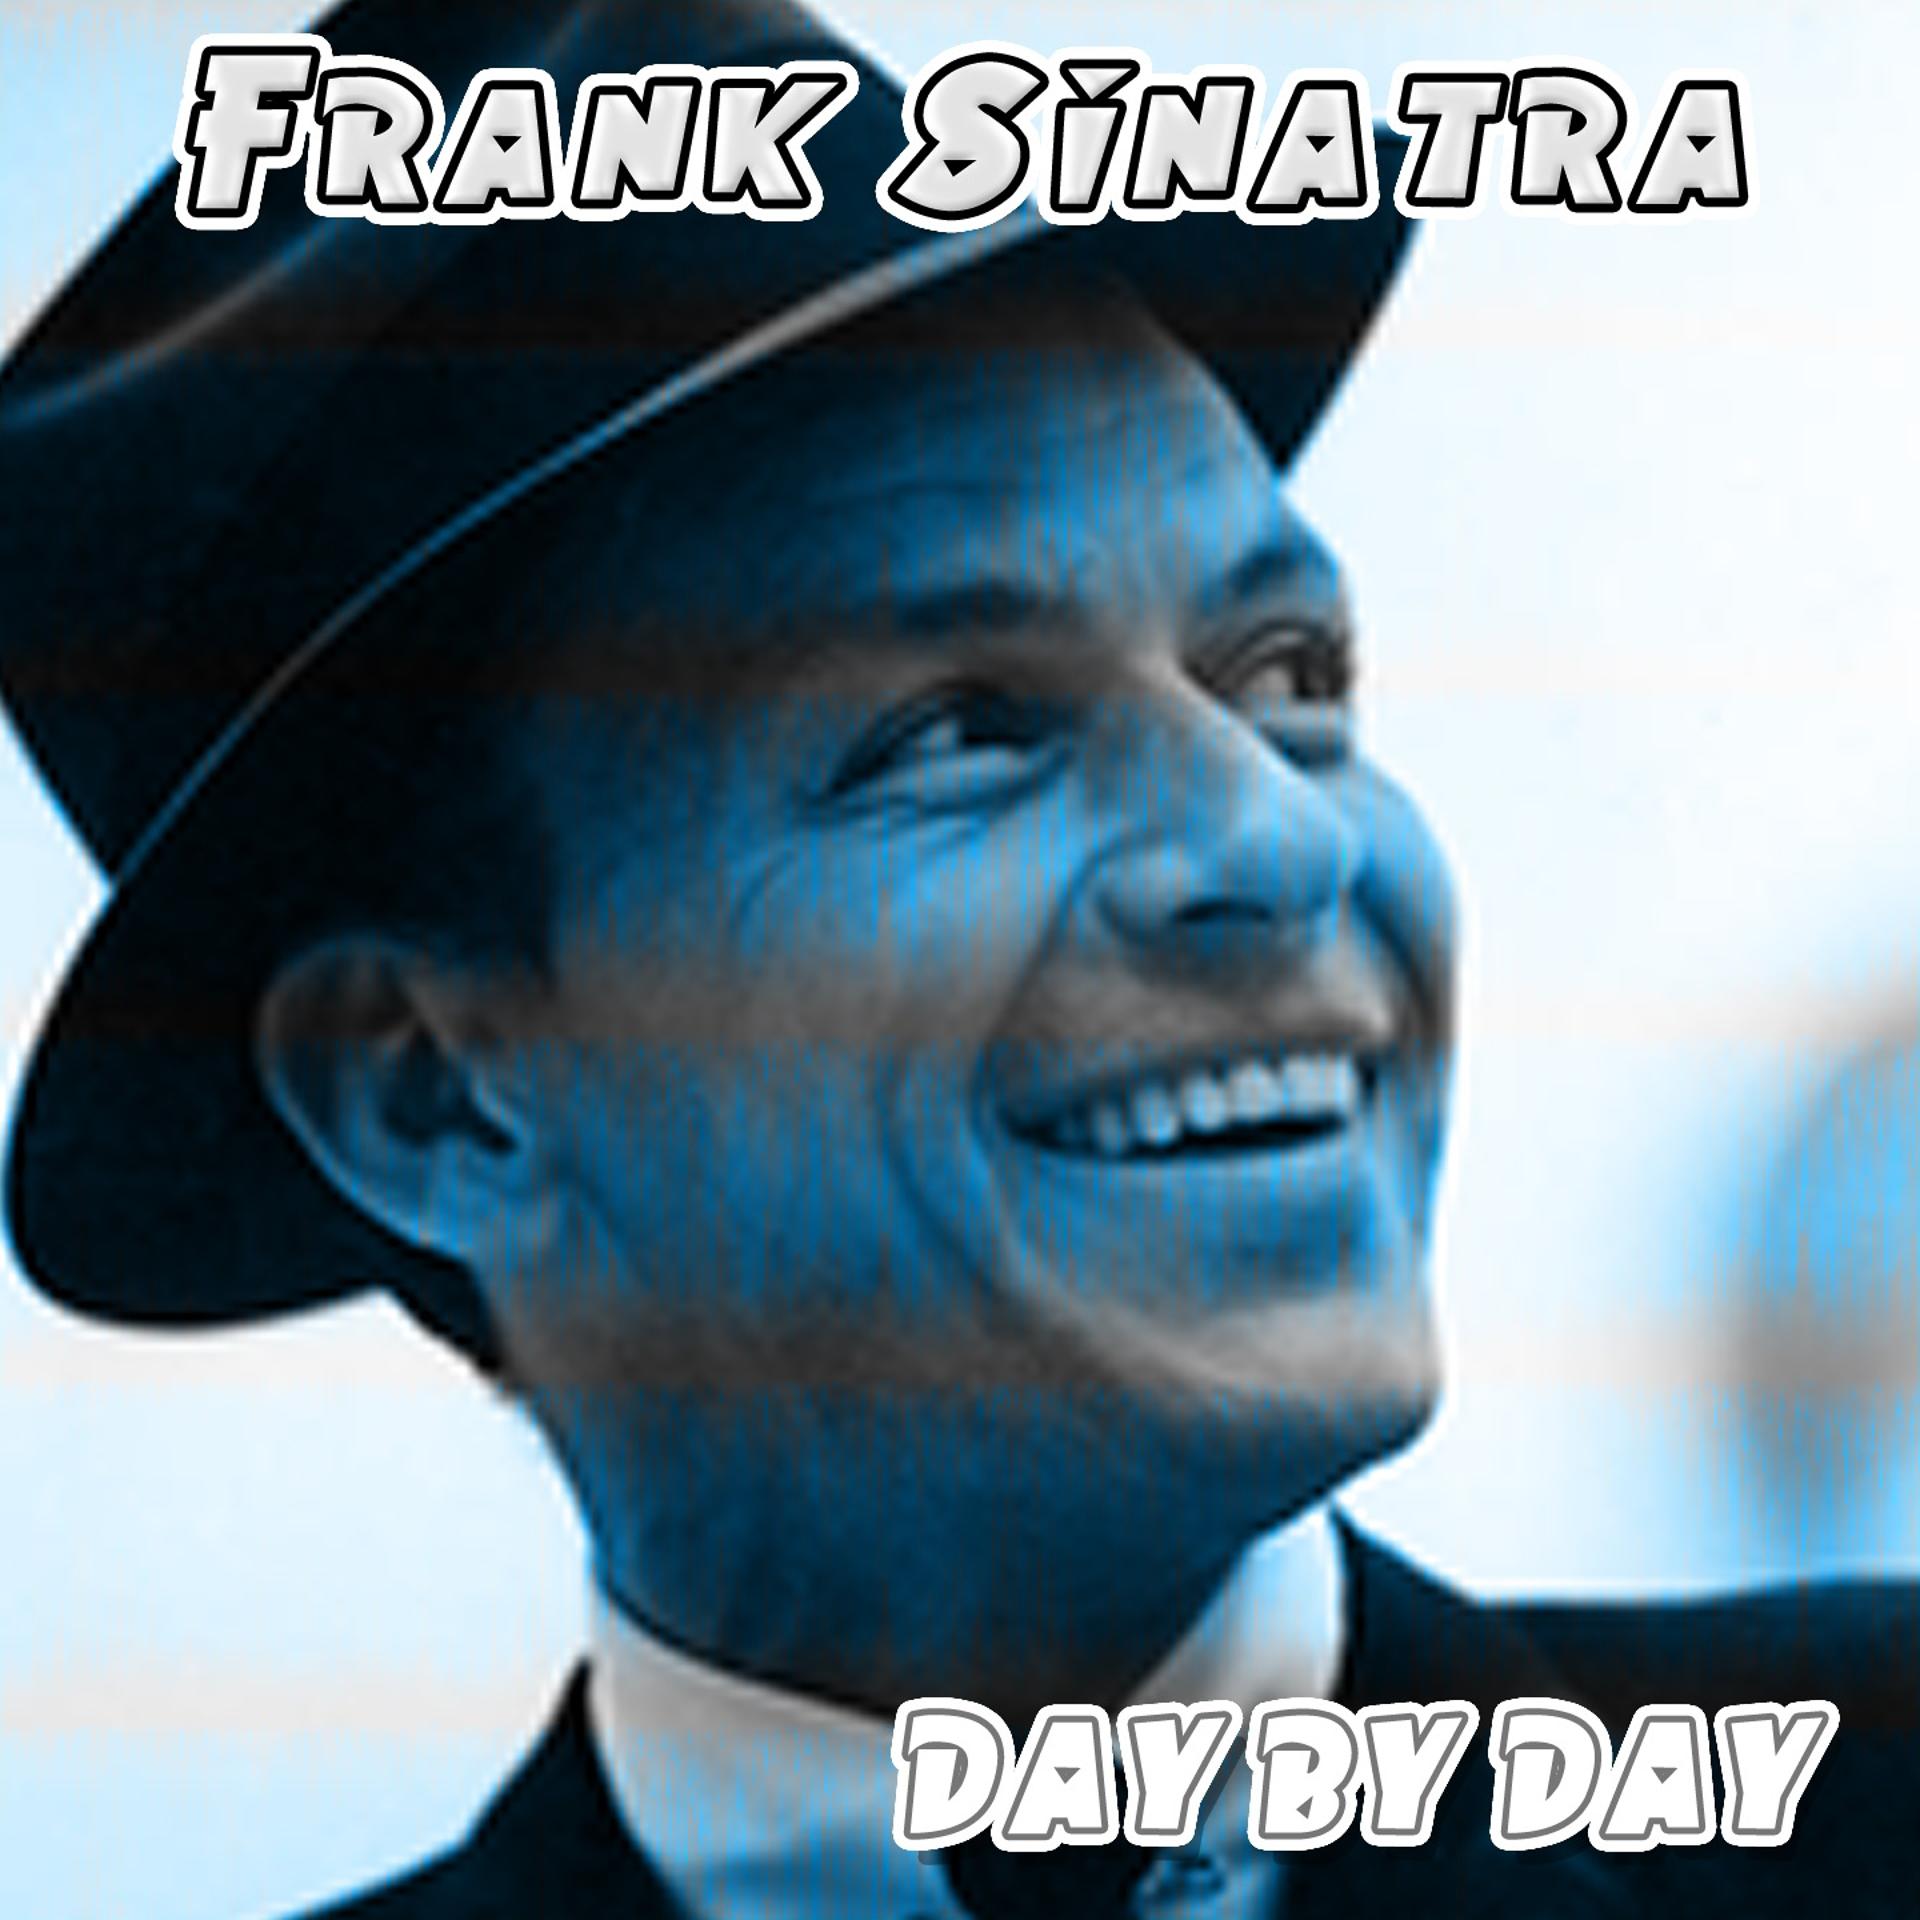 Frank Sinatra - on the Road to mandalay. Frank Sinatra - Oh, what it seemed to be. Night and Day Фрэнк Синатра. Frank Sinatra - it's over, it's over, it's over.